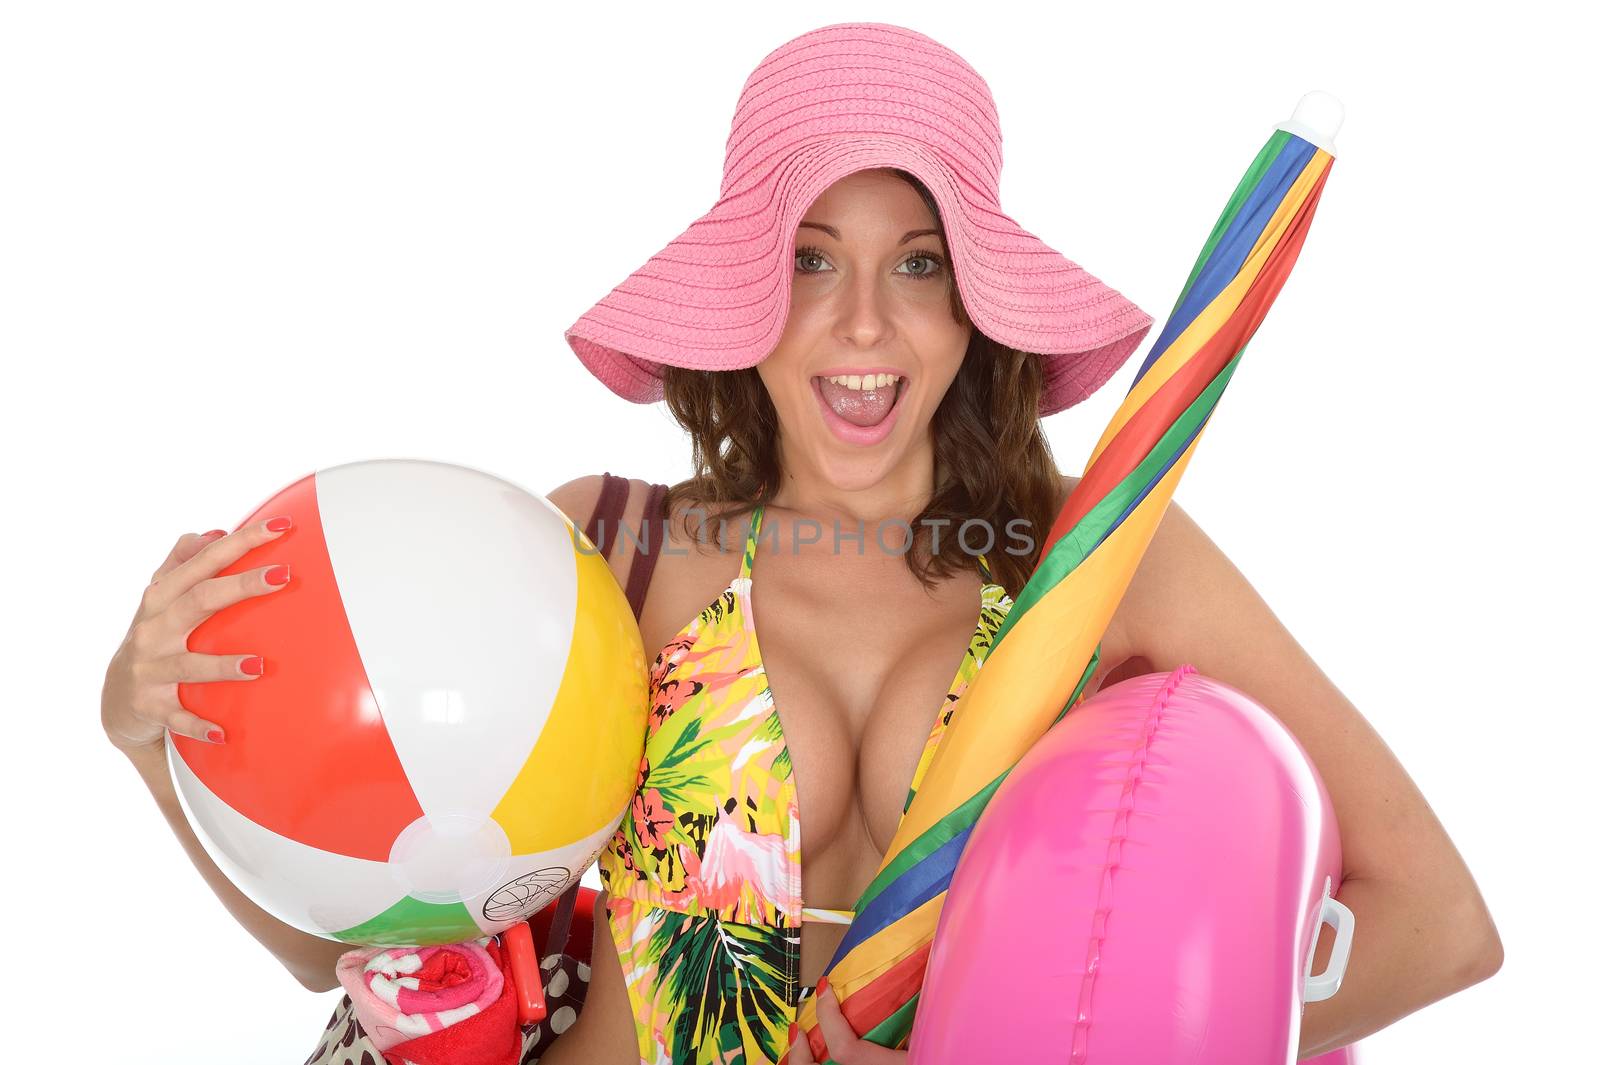 Young Woman Wearing a Swim Suit on Holiday Carrying a Beach Ball by Whiteboxmedia